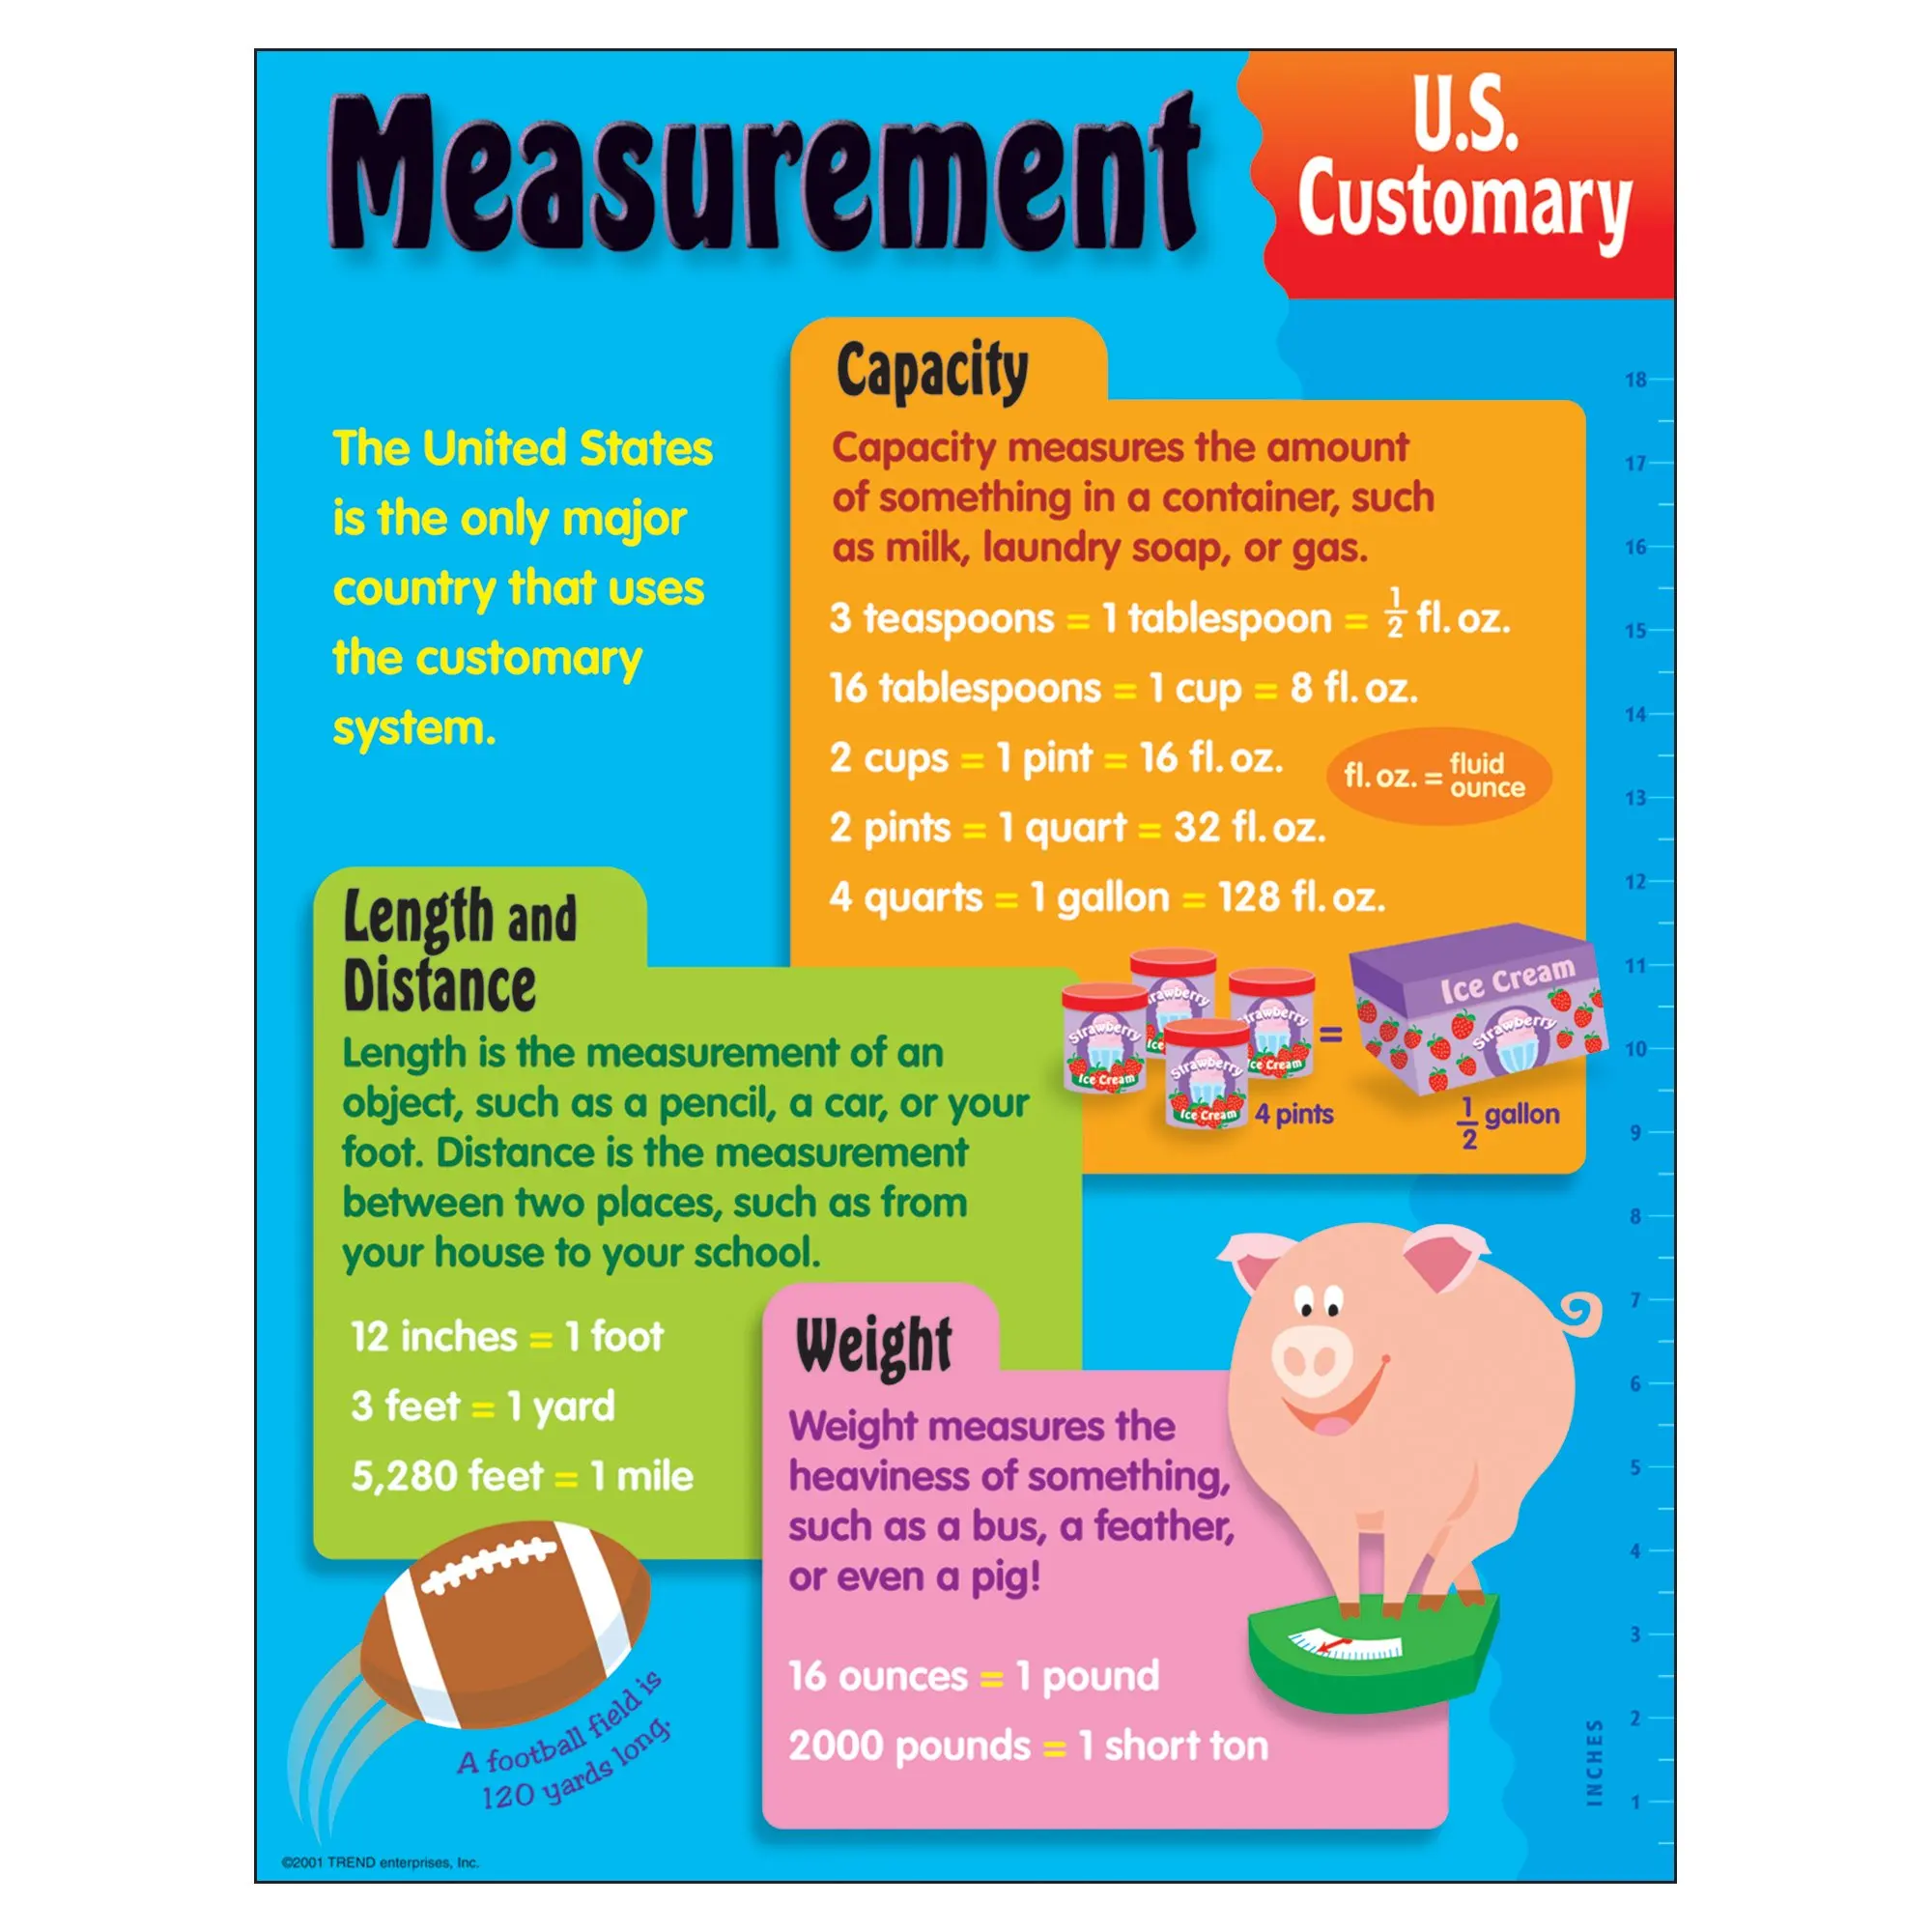 cheap-customary-and-metric-units-of-measurement-chart-find-customary